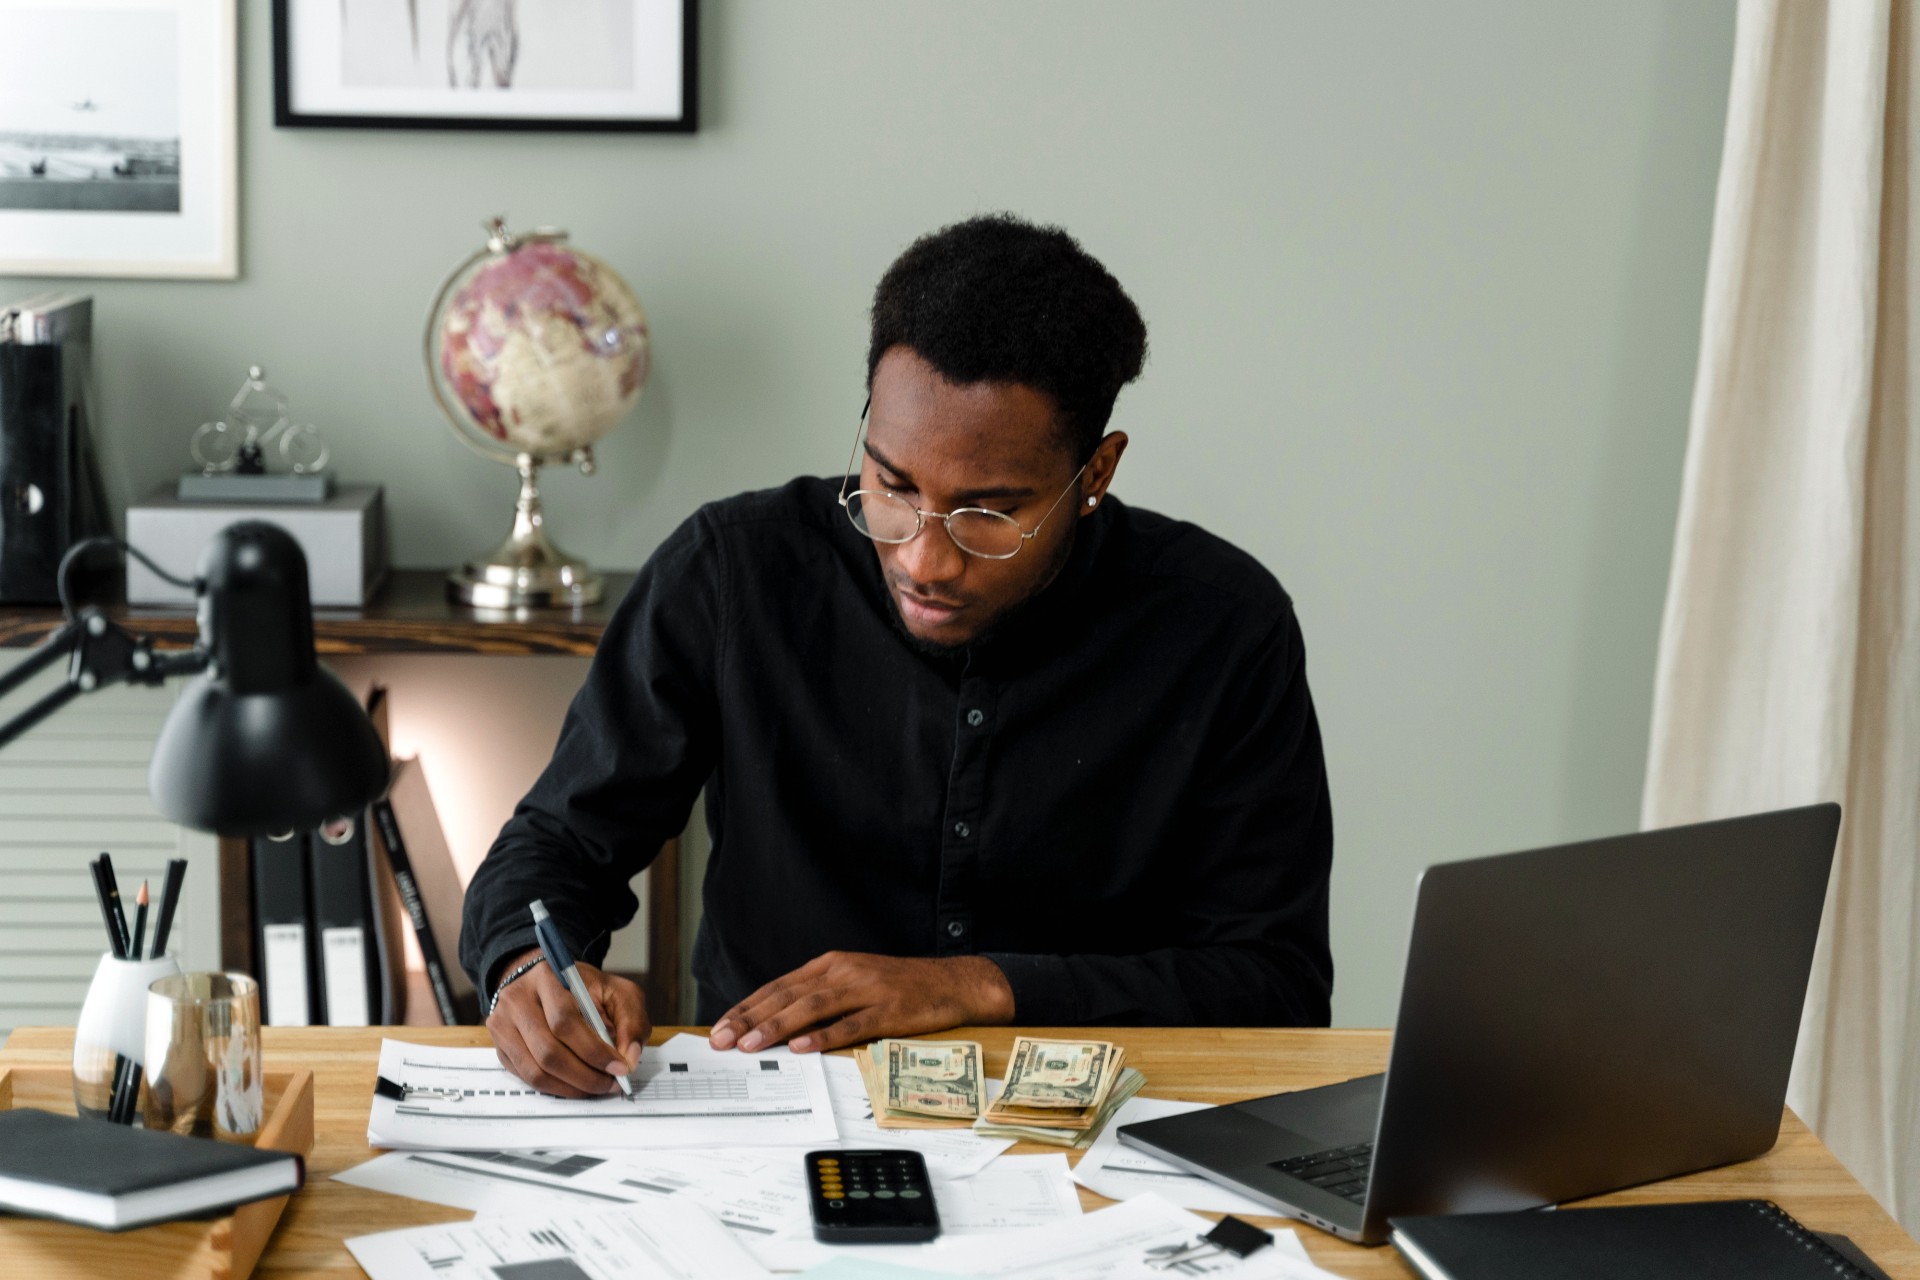 Watch out for these commonly overlooked expenses! As a first-time entrepreneur, you'll want to remain in control when it comes to budgeting.